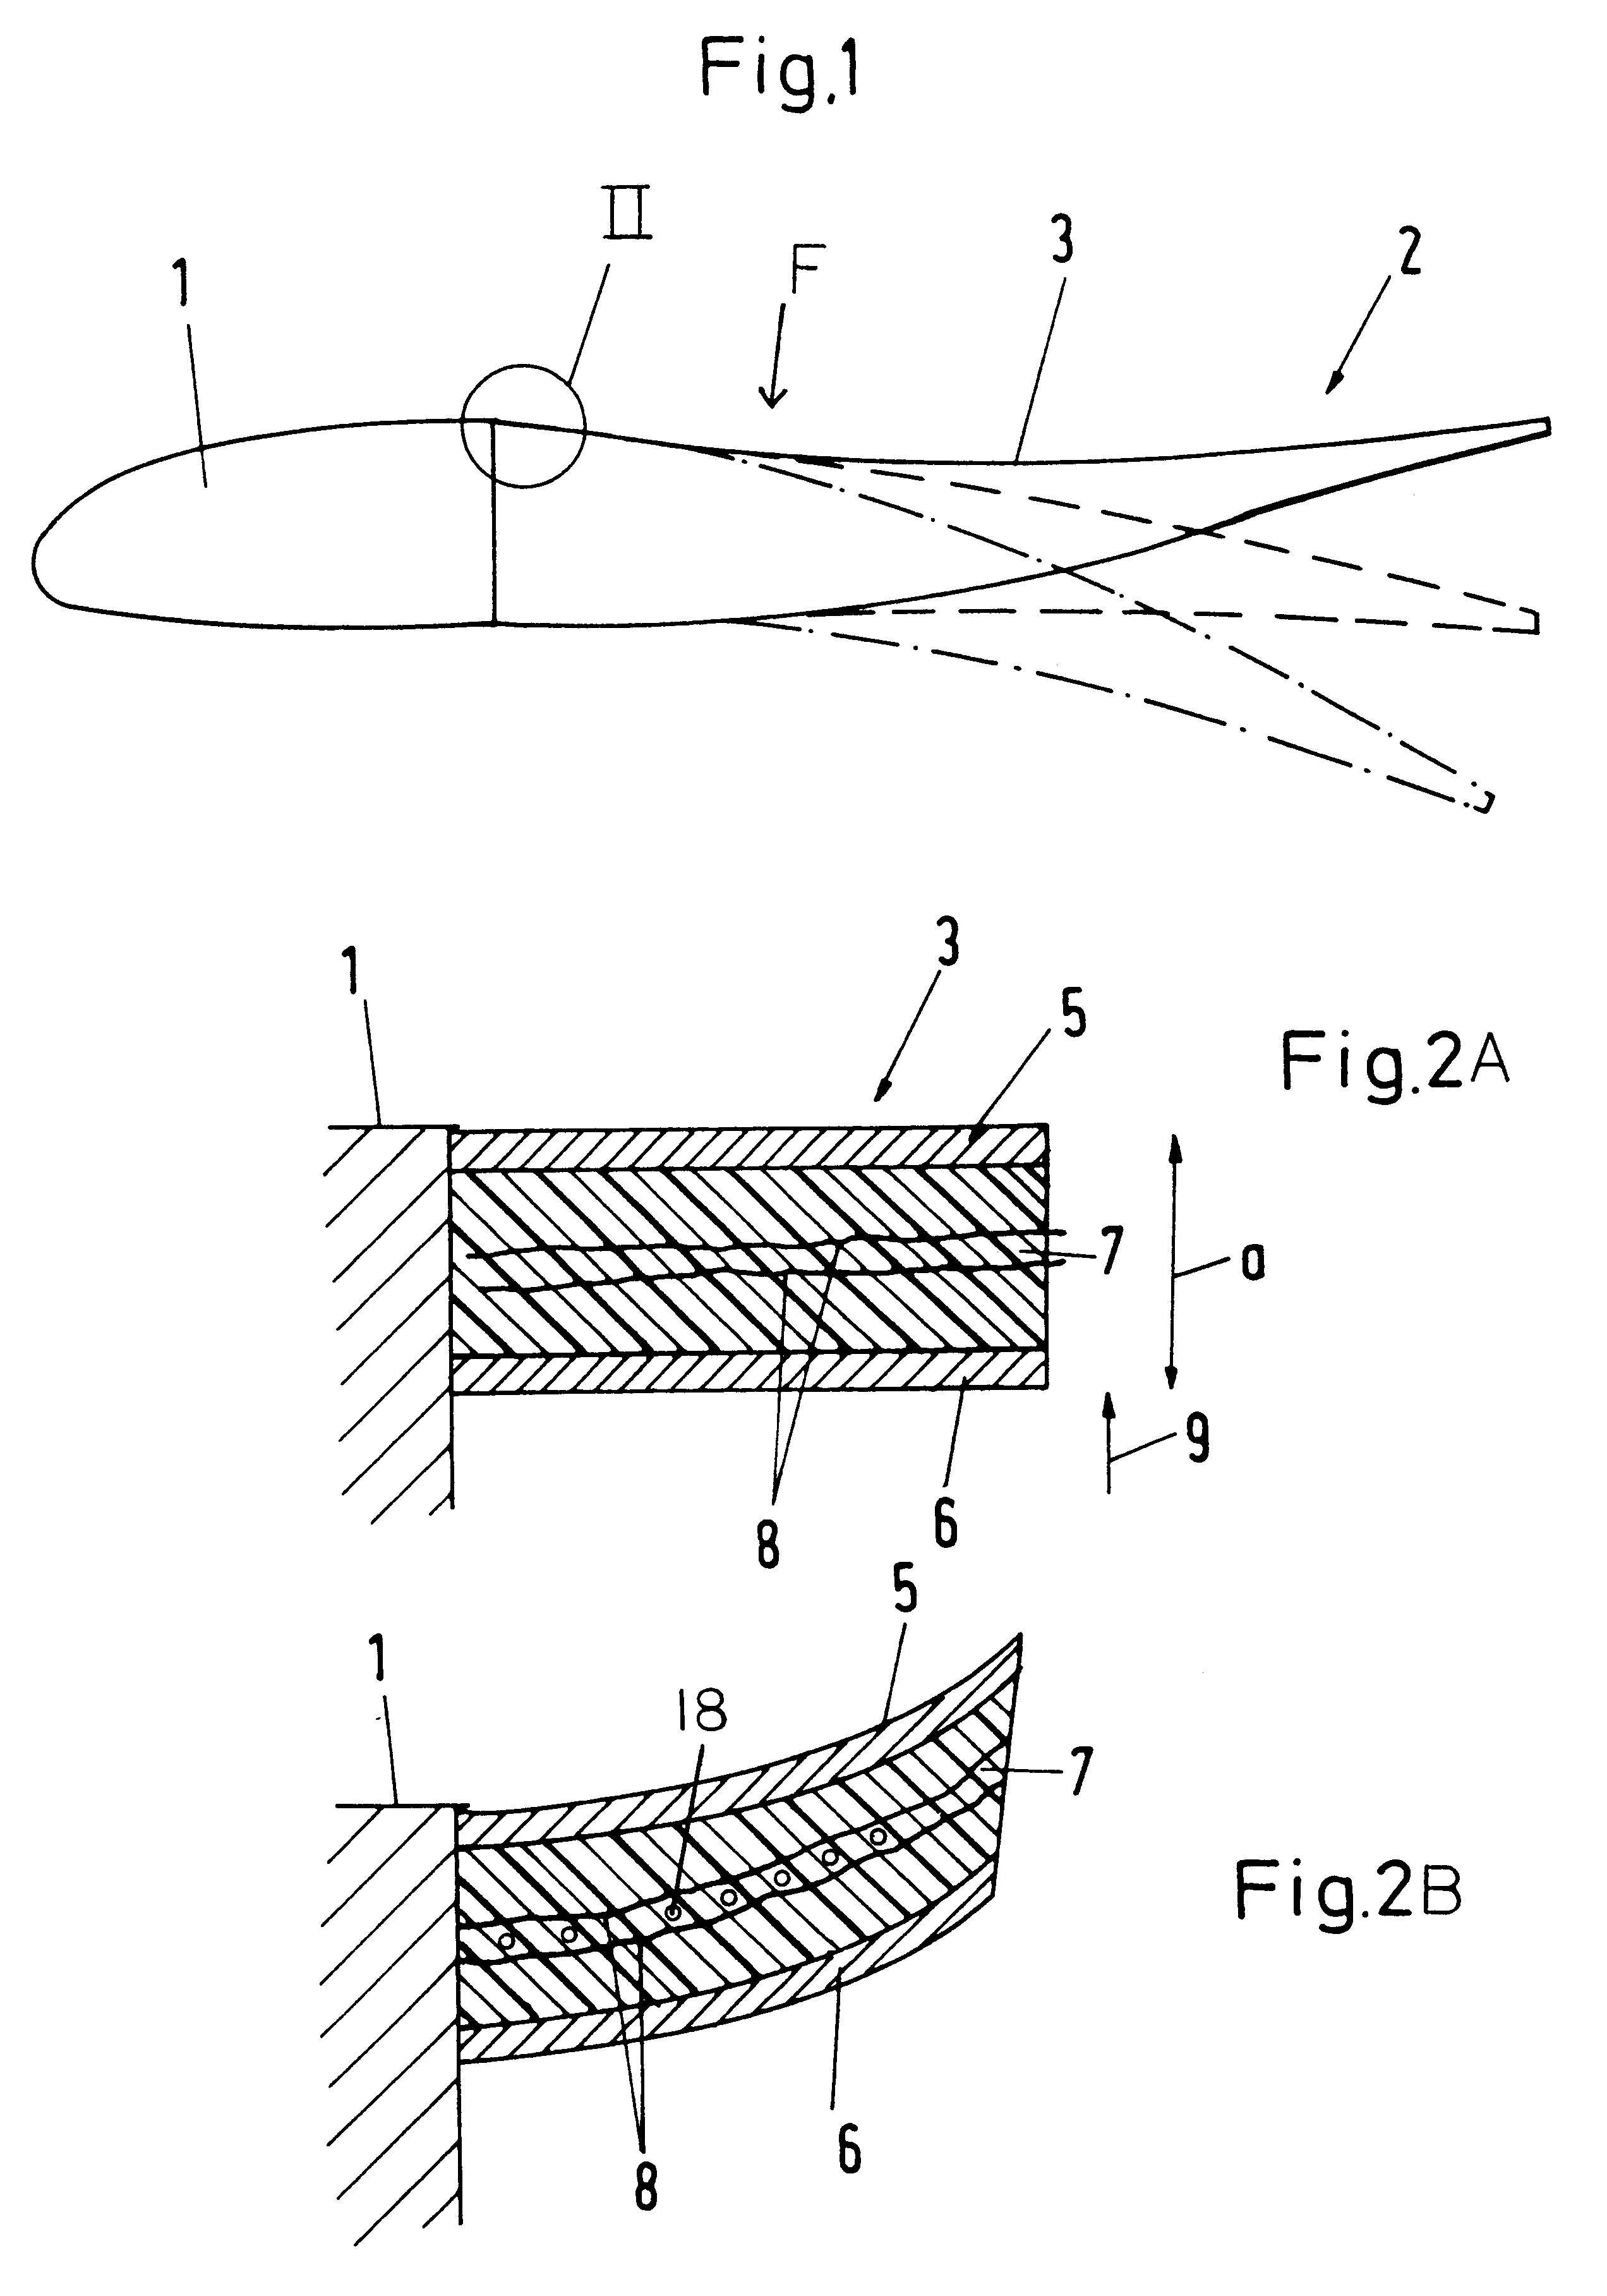 Load carrying structure having variable flexibility